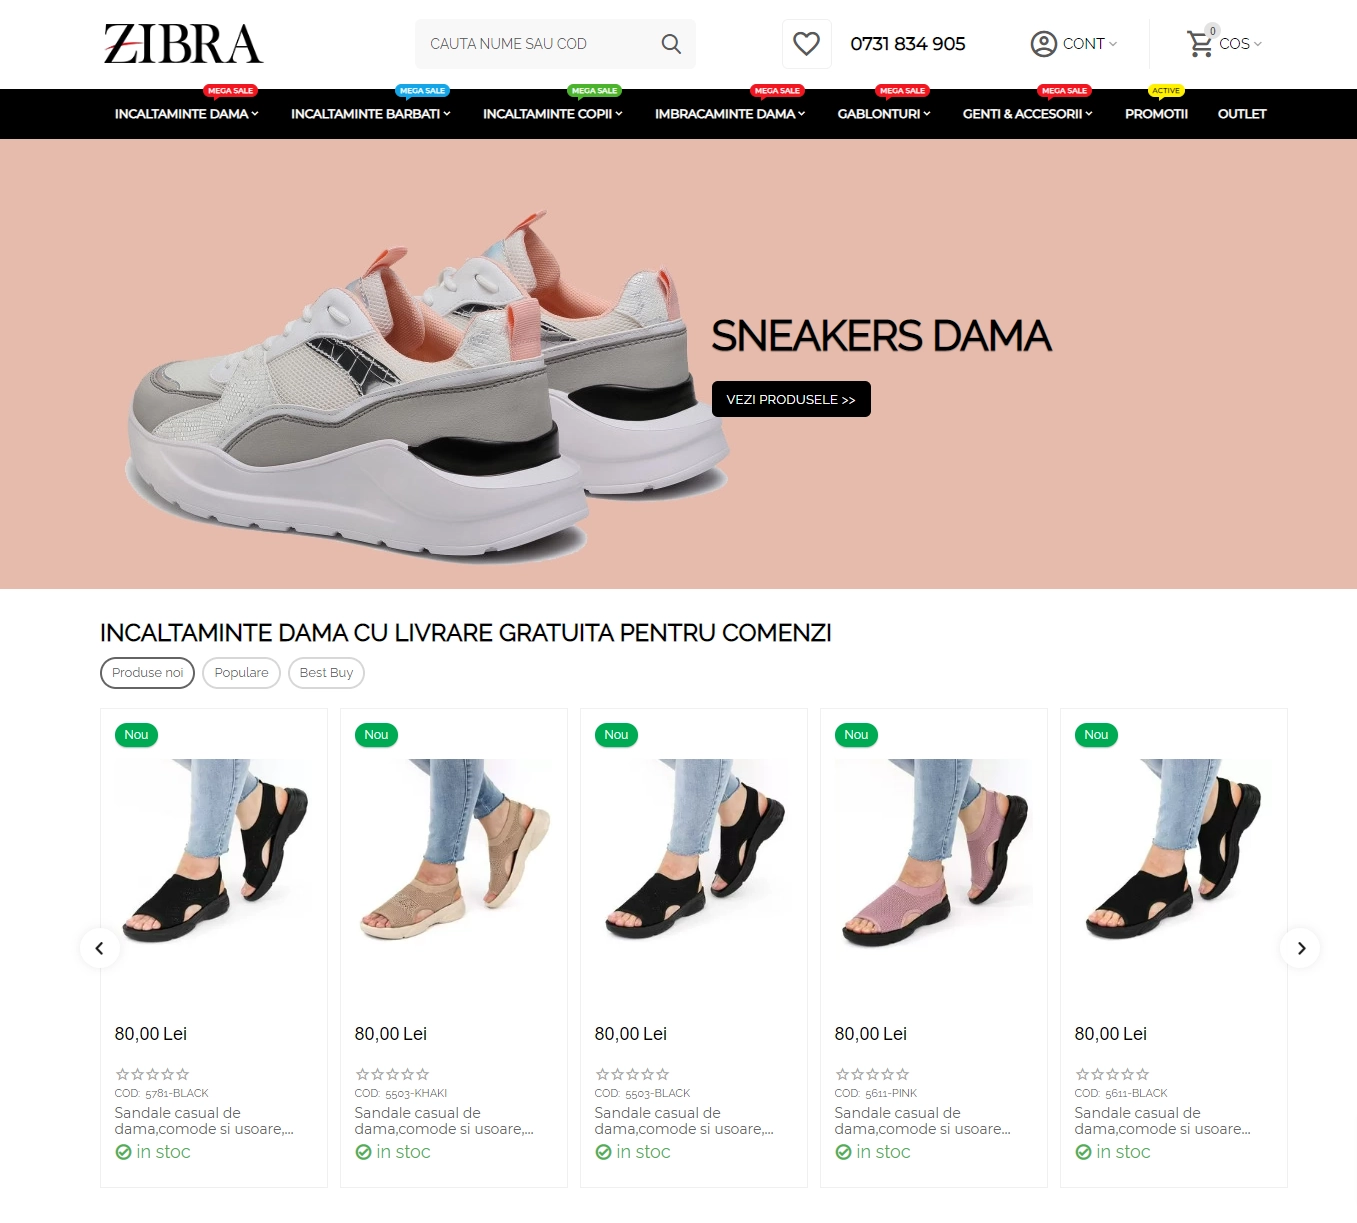 Zibra shoes for the whole family